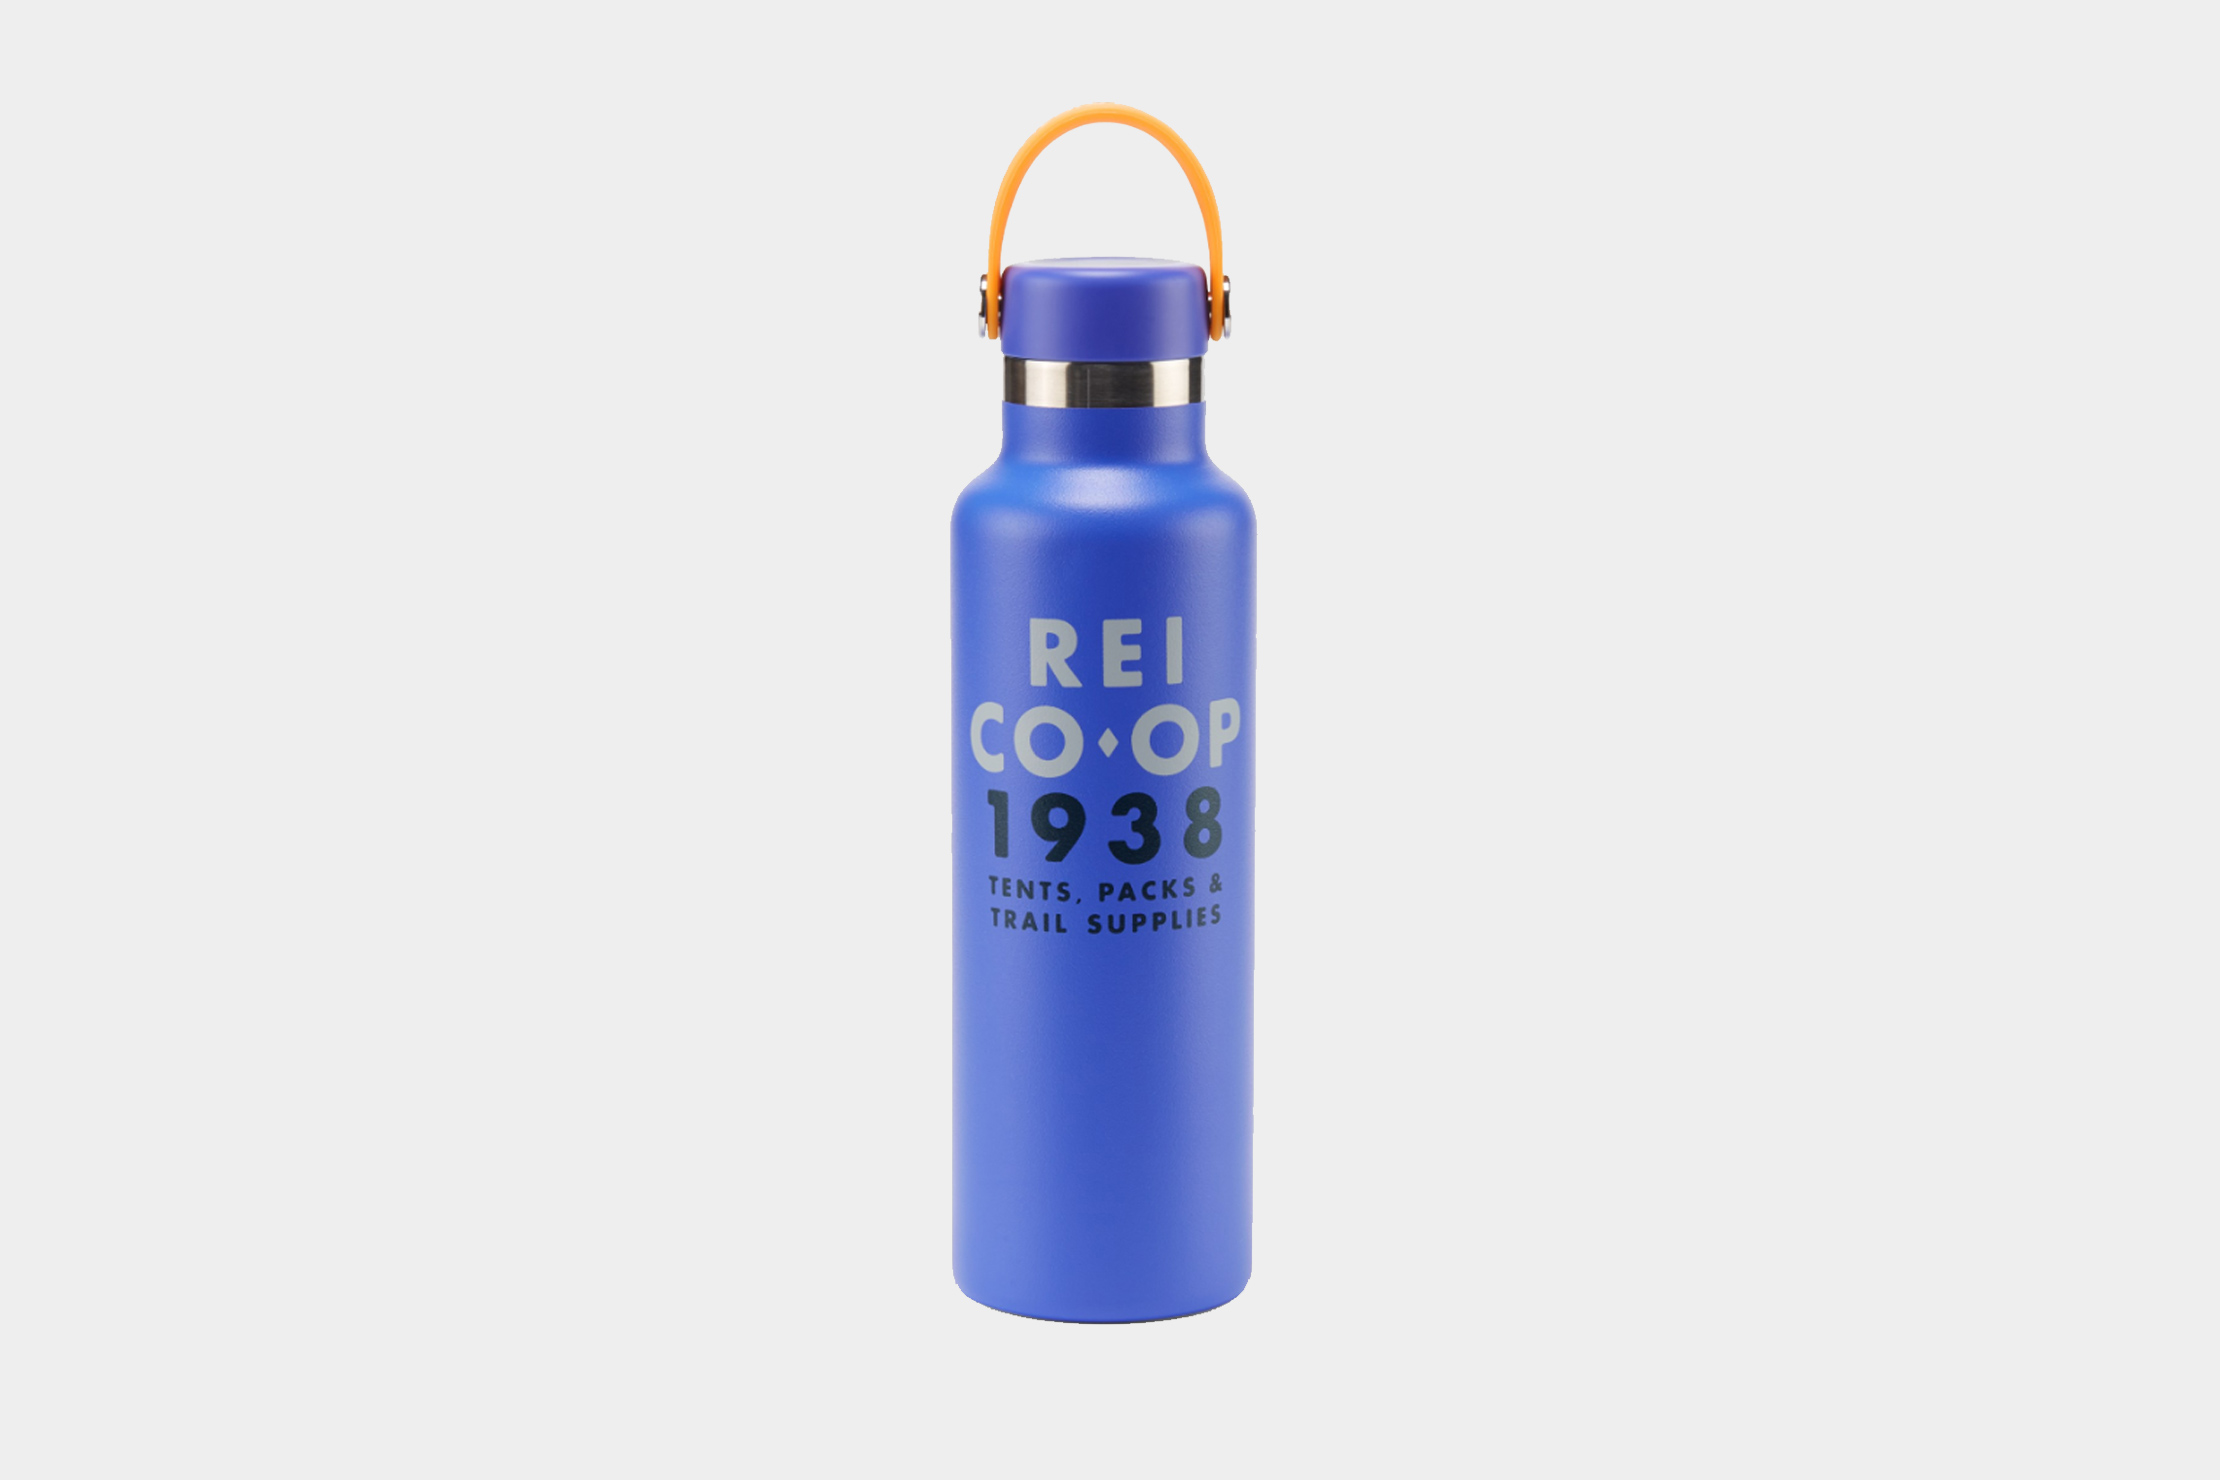 Keeping Hot (and Cool!) with Hydro Flask – plus a GIVEAWAY!